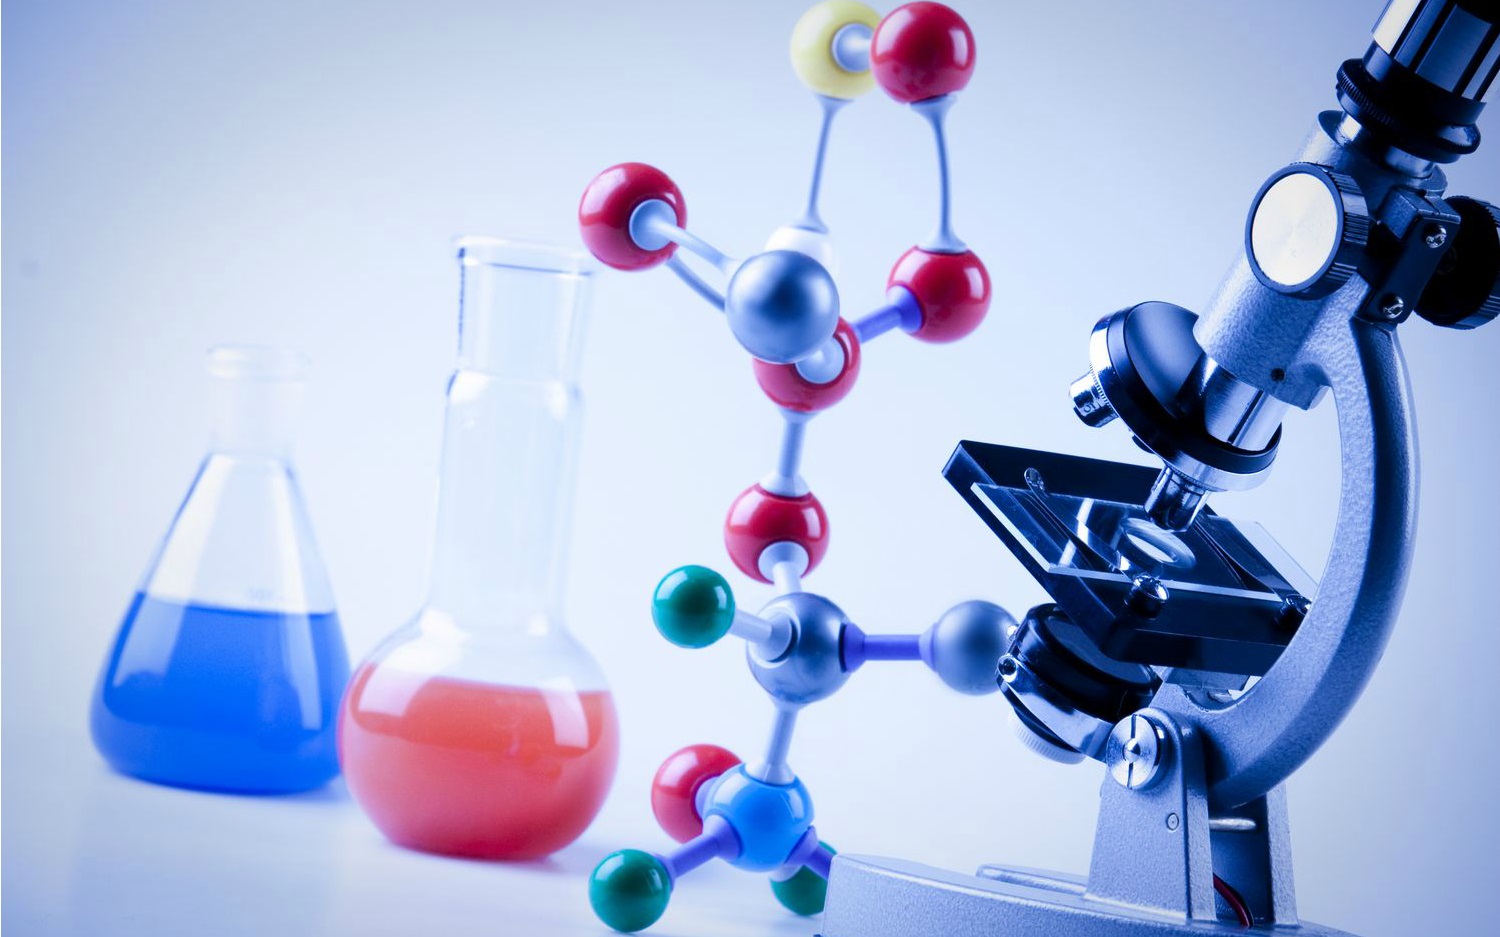 Unlocking the Potential of Life Science Research: An In-Depth Analysis of the Global Life Science Tools and Reagents Market